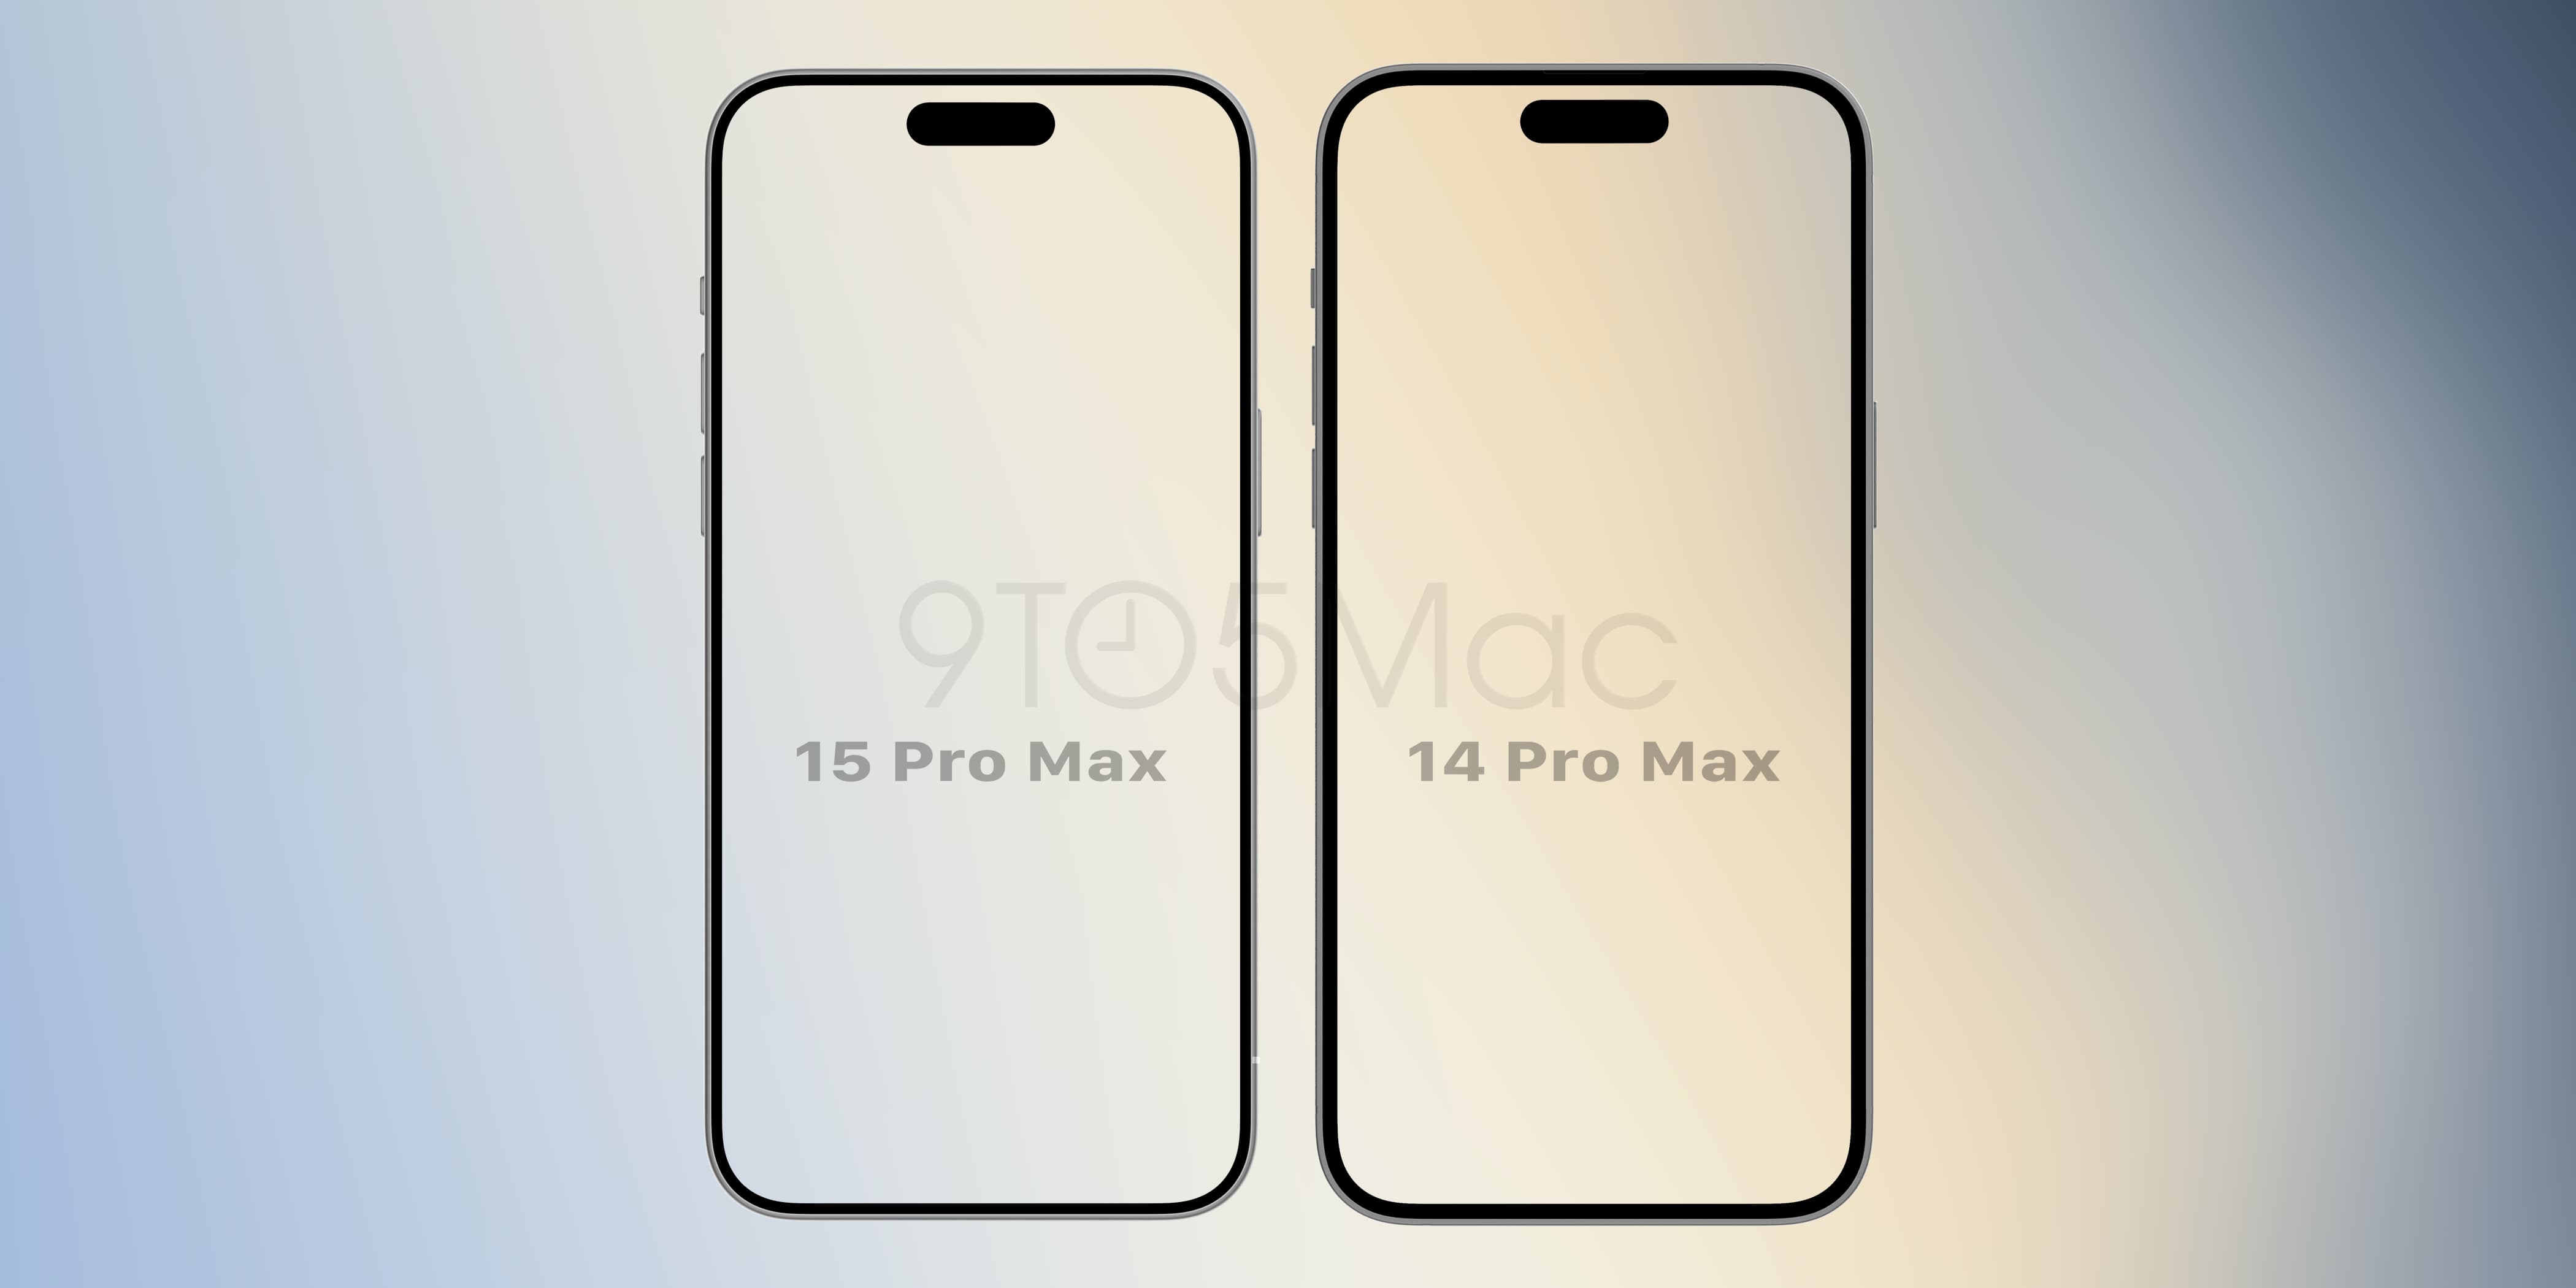 iPhone 15 Pro Likely to Feature Up to 8GB RAM, 1TB Storage - MacRumors